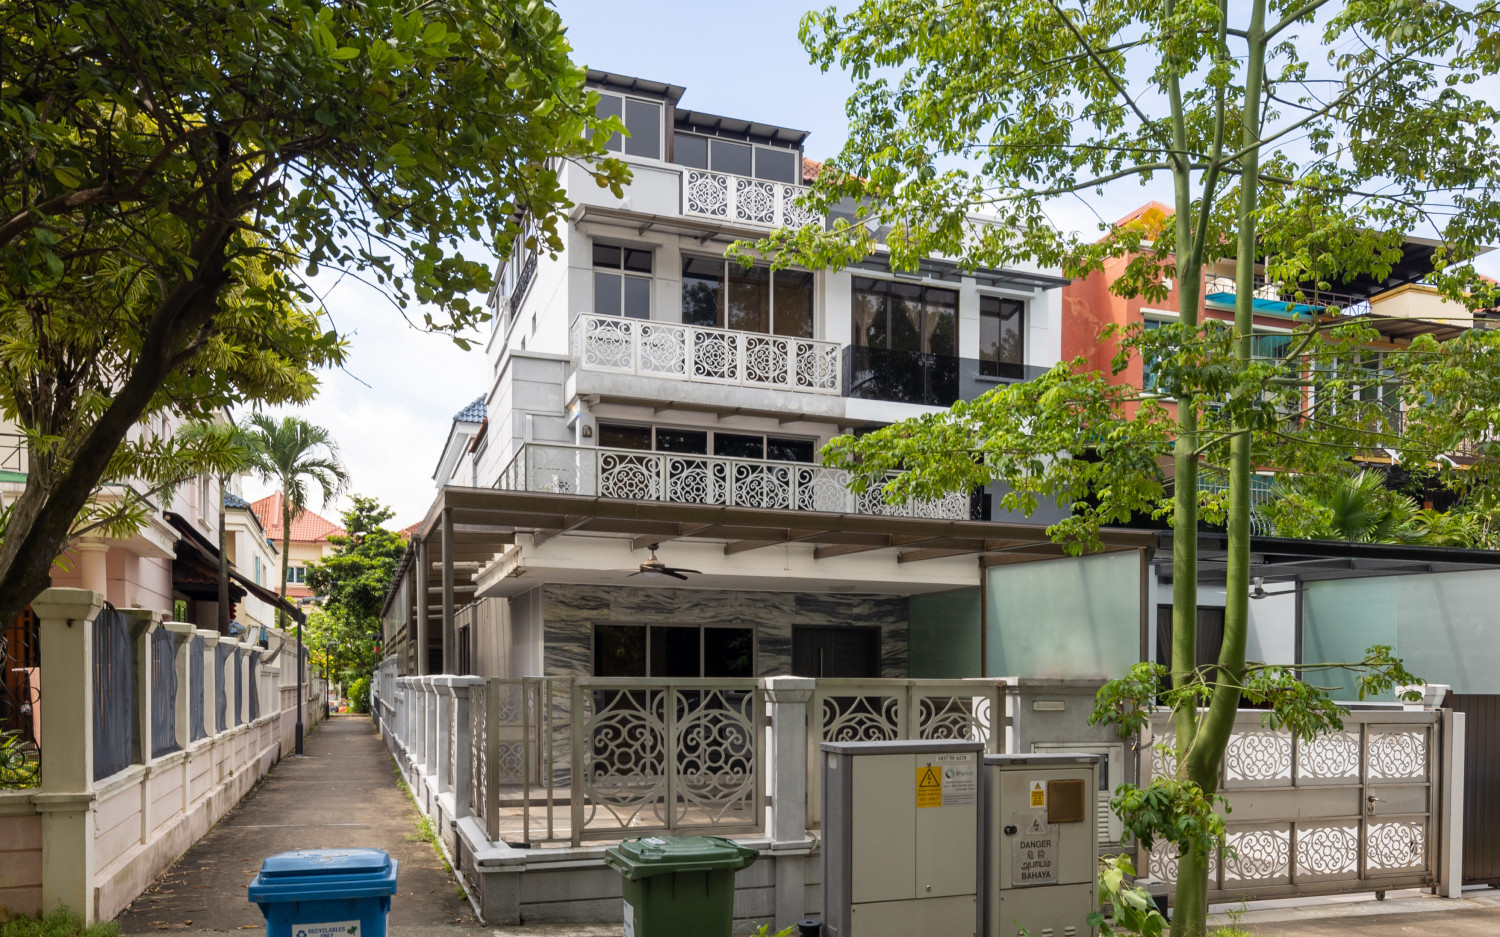 Mortgagee sale of corner terraced house at Villa Verde for $2.35 mil - Property News